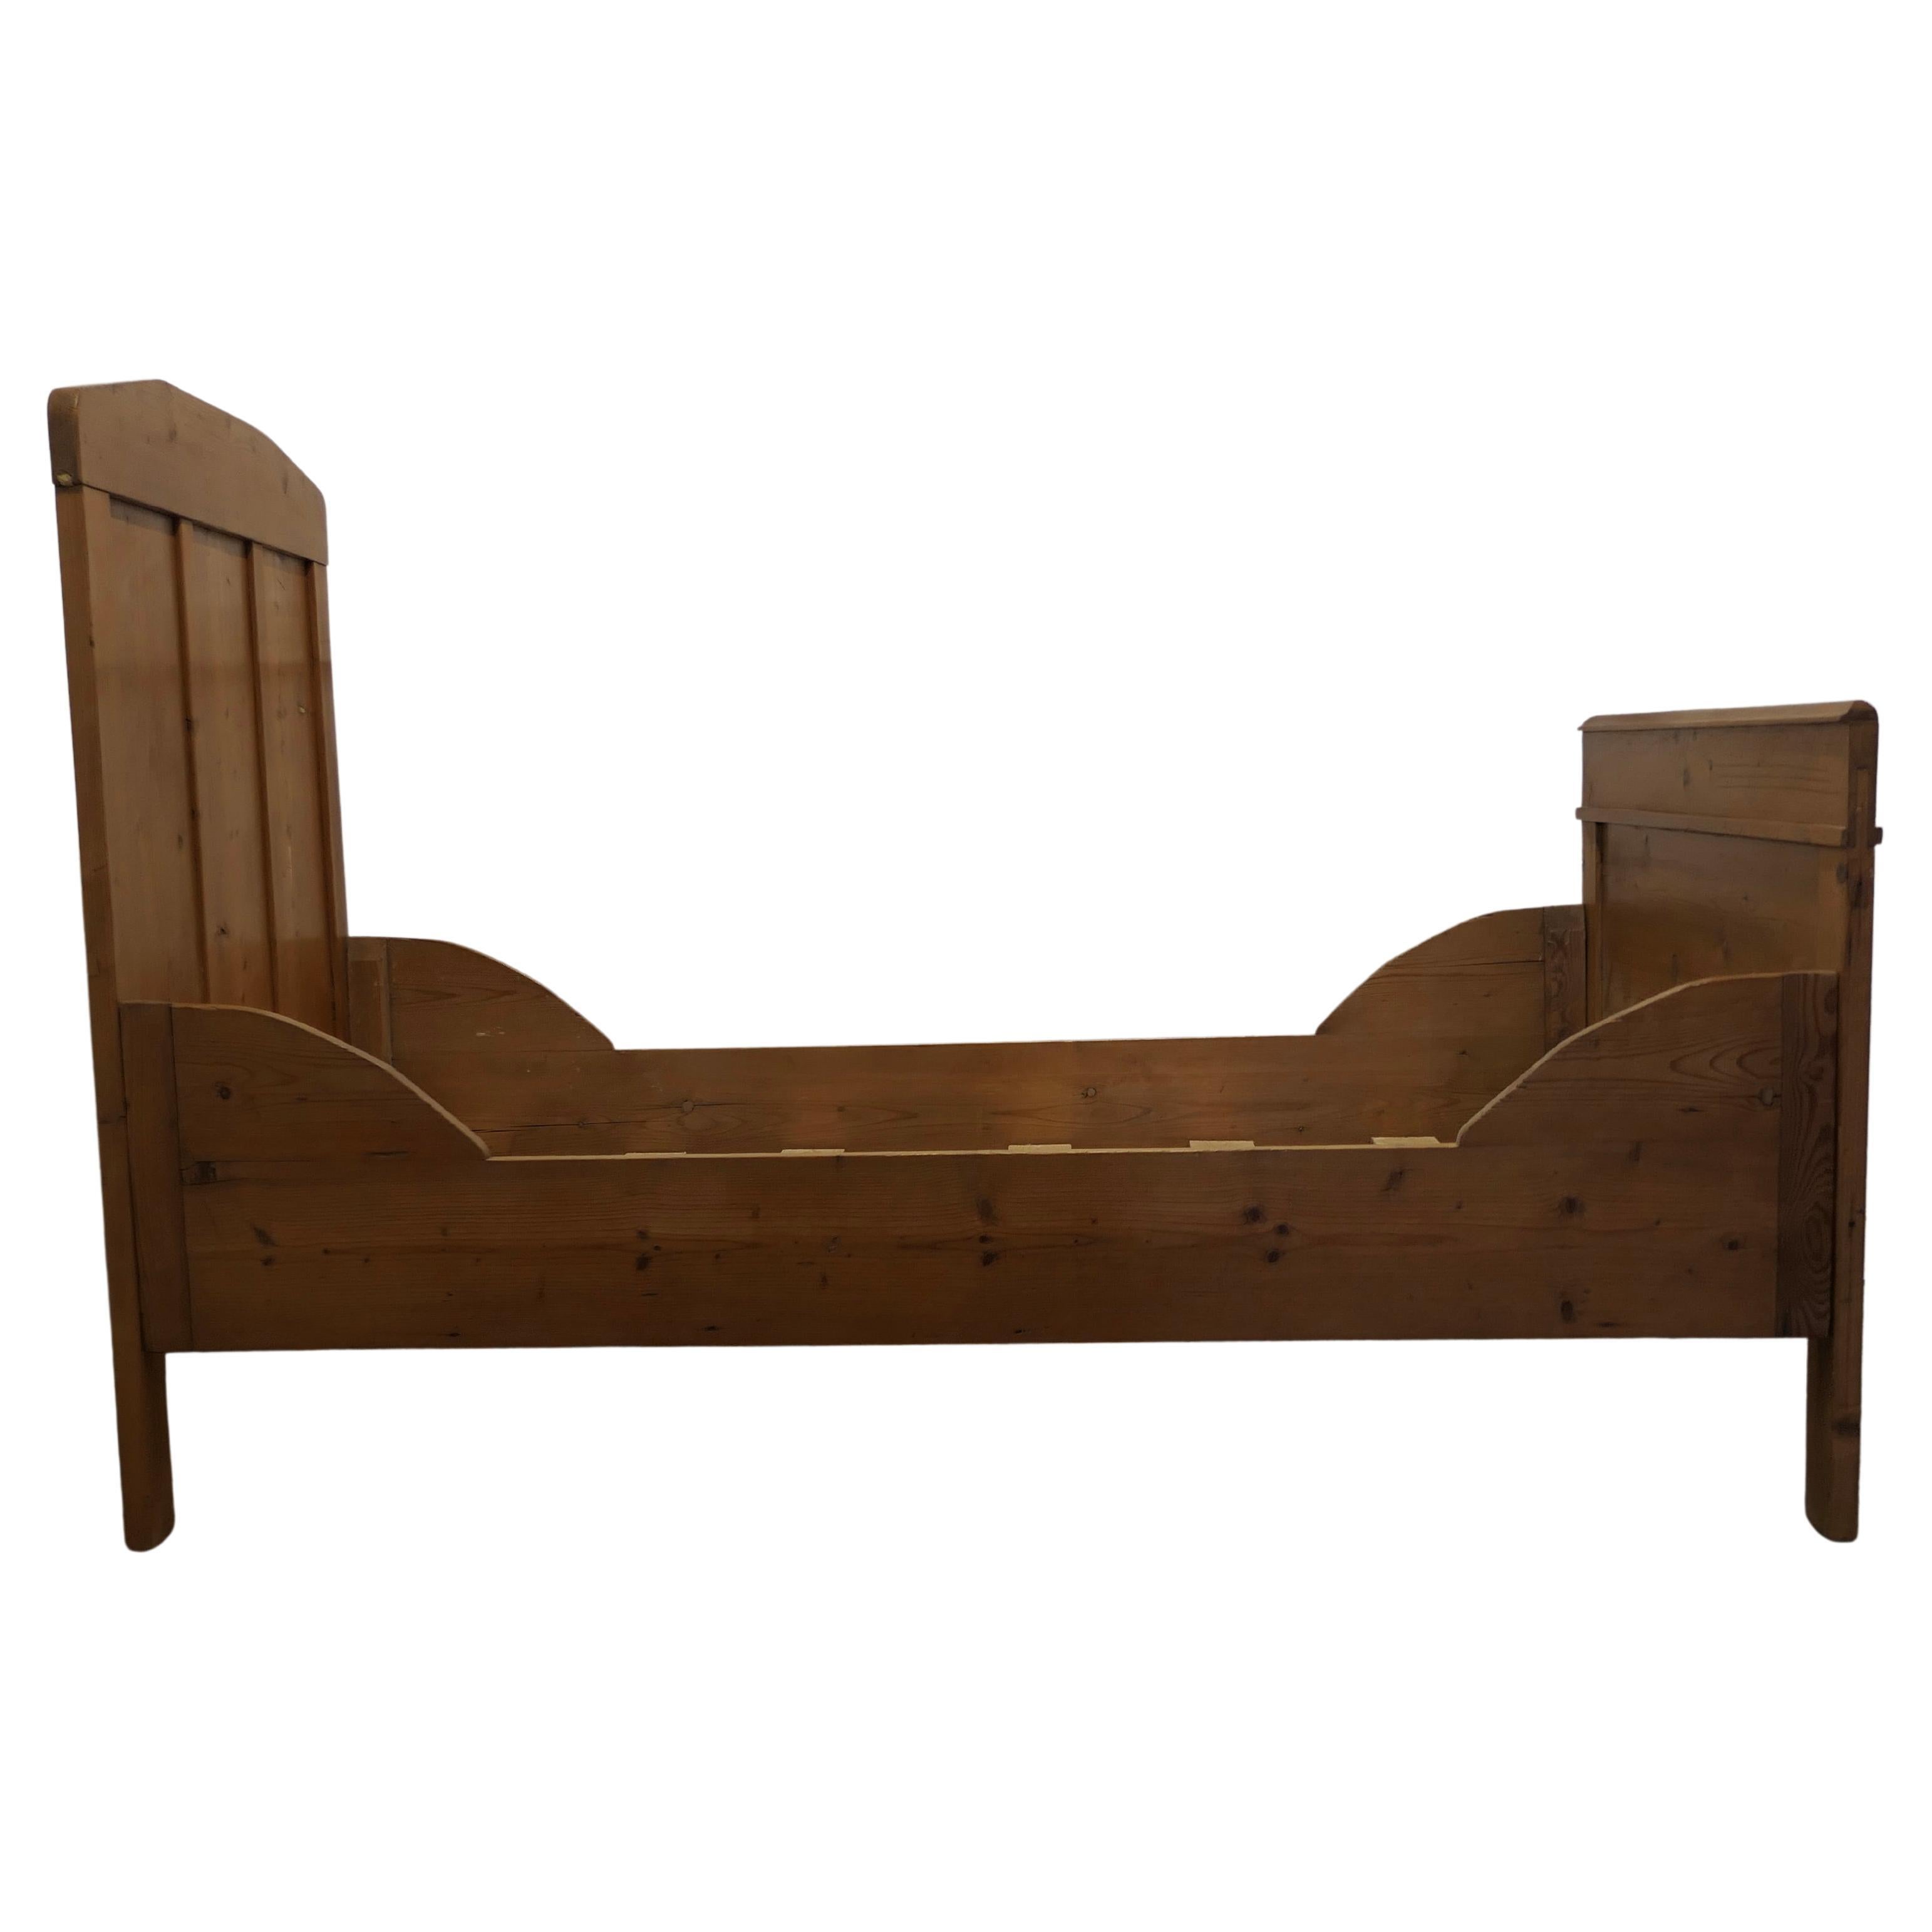 A 19th Century French Rustic Pine Single Sleigh Bed   